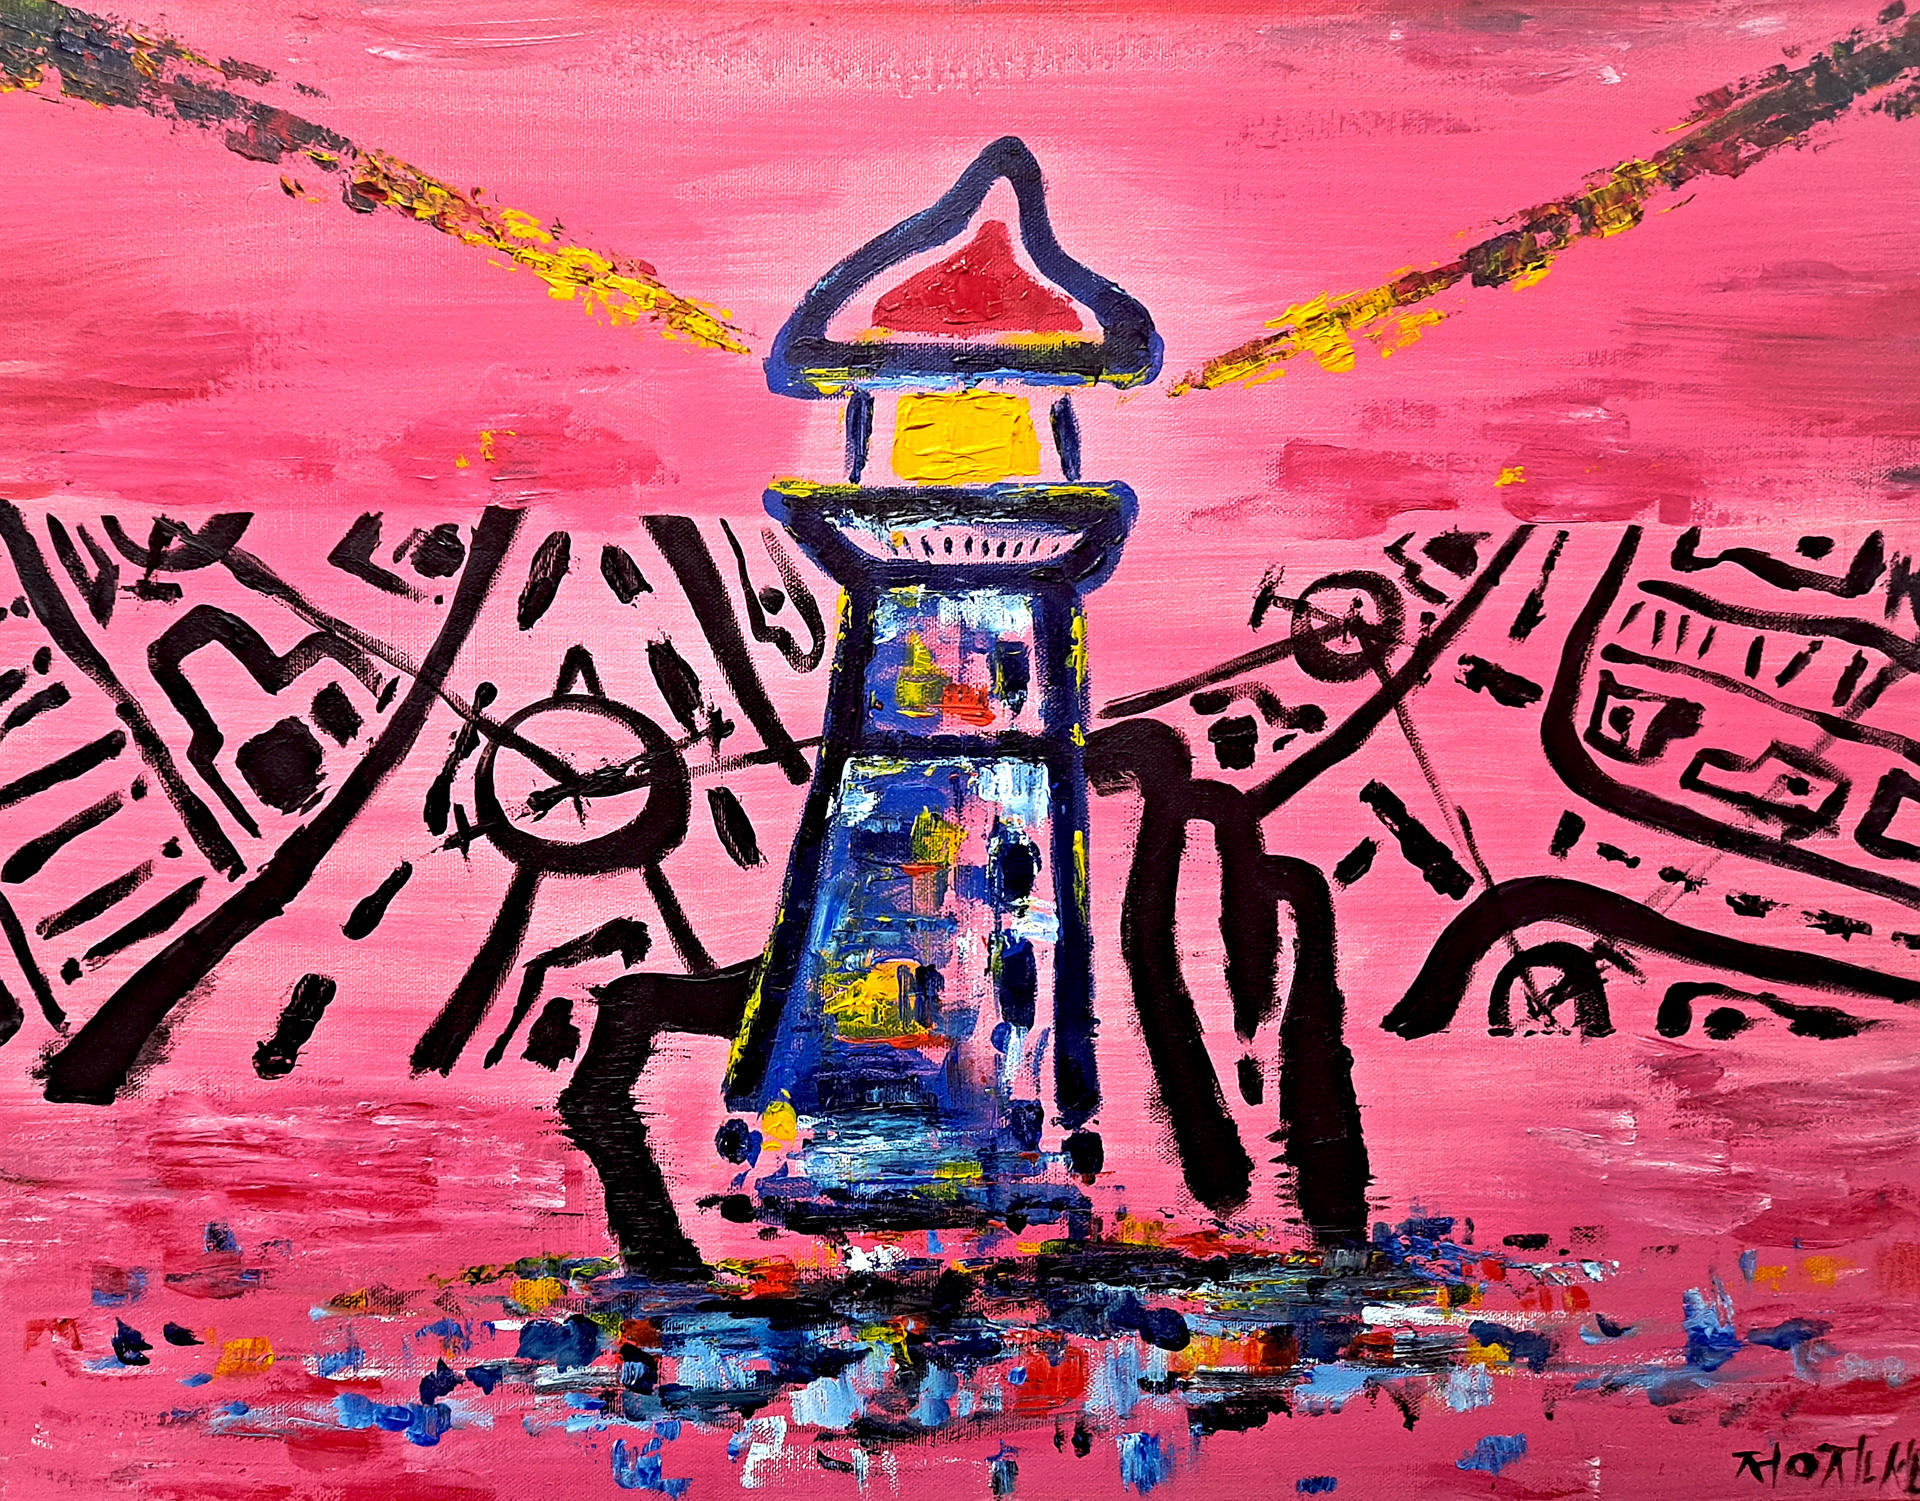 <span style="font-size: 14px; font-family: 'Gilroy' !important;">삽이-정진섭, 손등대 Hand lighthouse, 2020, Acrylic on canvas, P10호(53x40.9cm)</span>